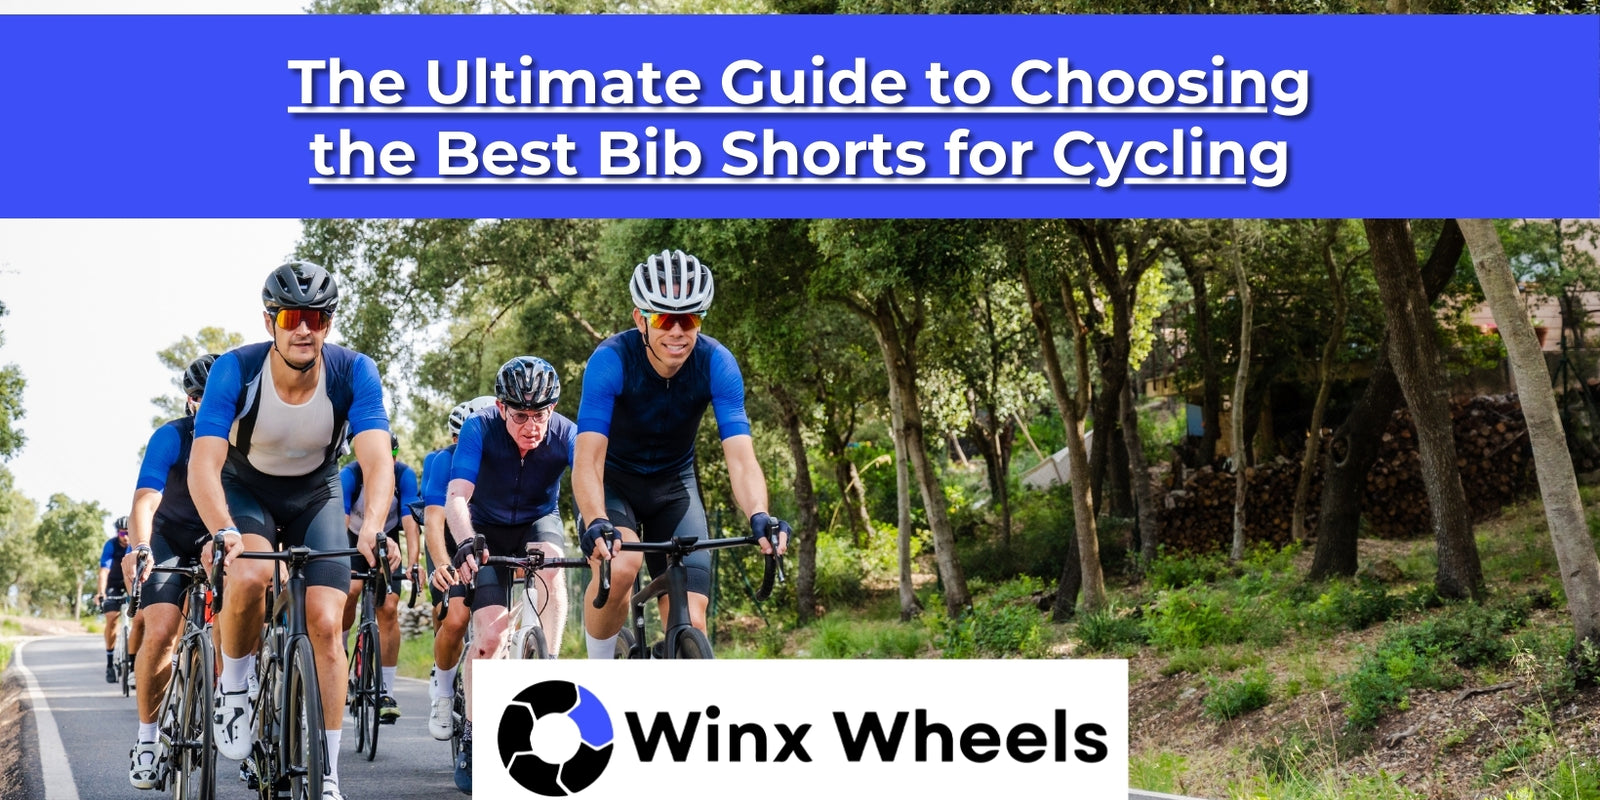 The Ultimate Guide to Choosing the Best Bib Shorts for Cycling